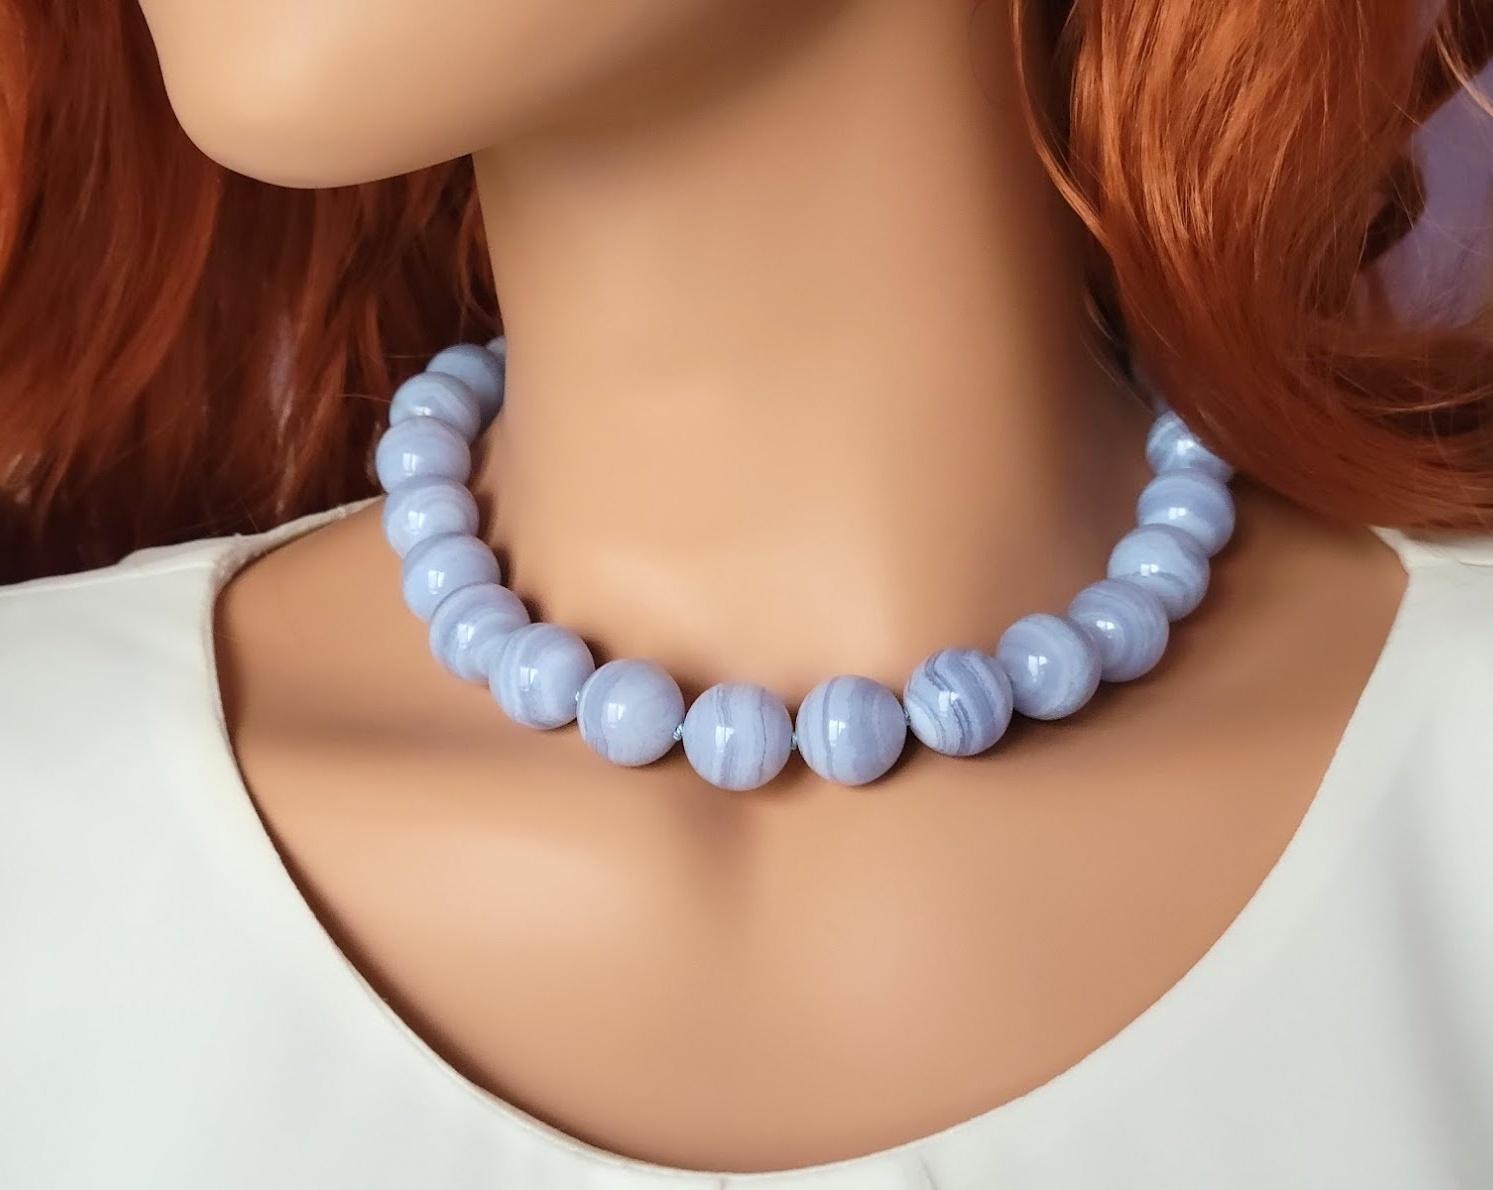 The length of the necklace is 17.5 inches (44.5 cm).
The size of the smooth round beads is 16 mm.
Blue Agate and Blue Lace Agate are interchangeable names of the same type of banded Chalcedony belonging to the microcrystalline Quartz family.